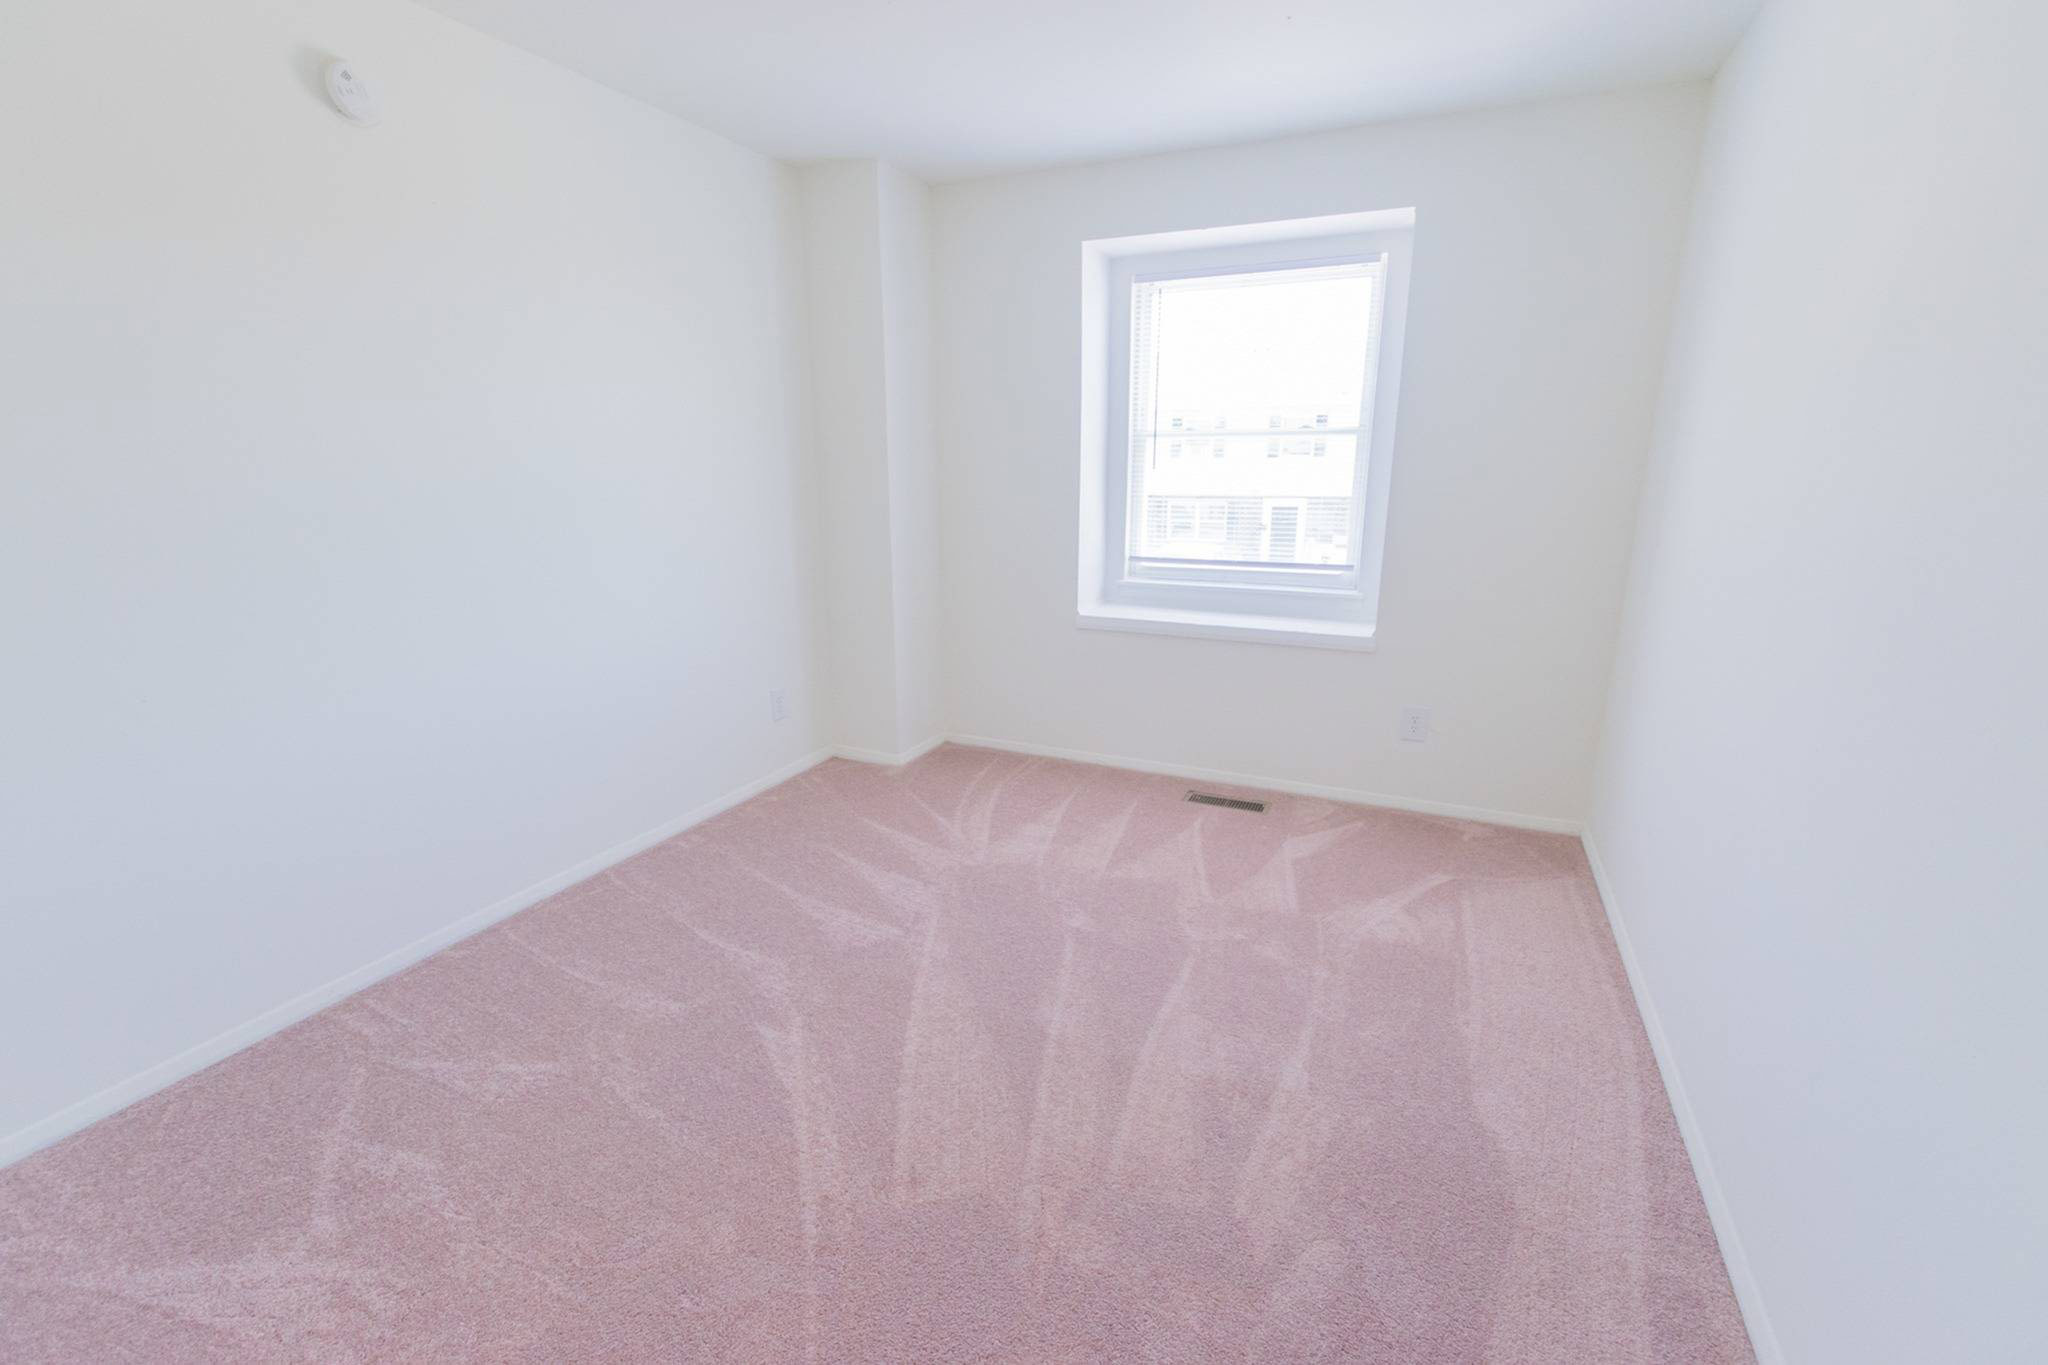 Bedroom with a window, white walls, and light pink carpet.